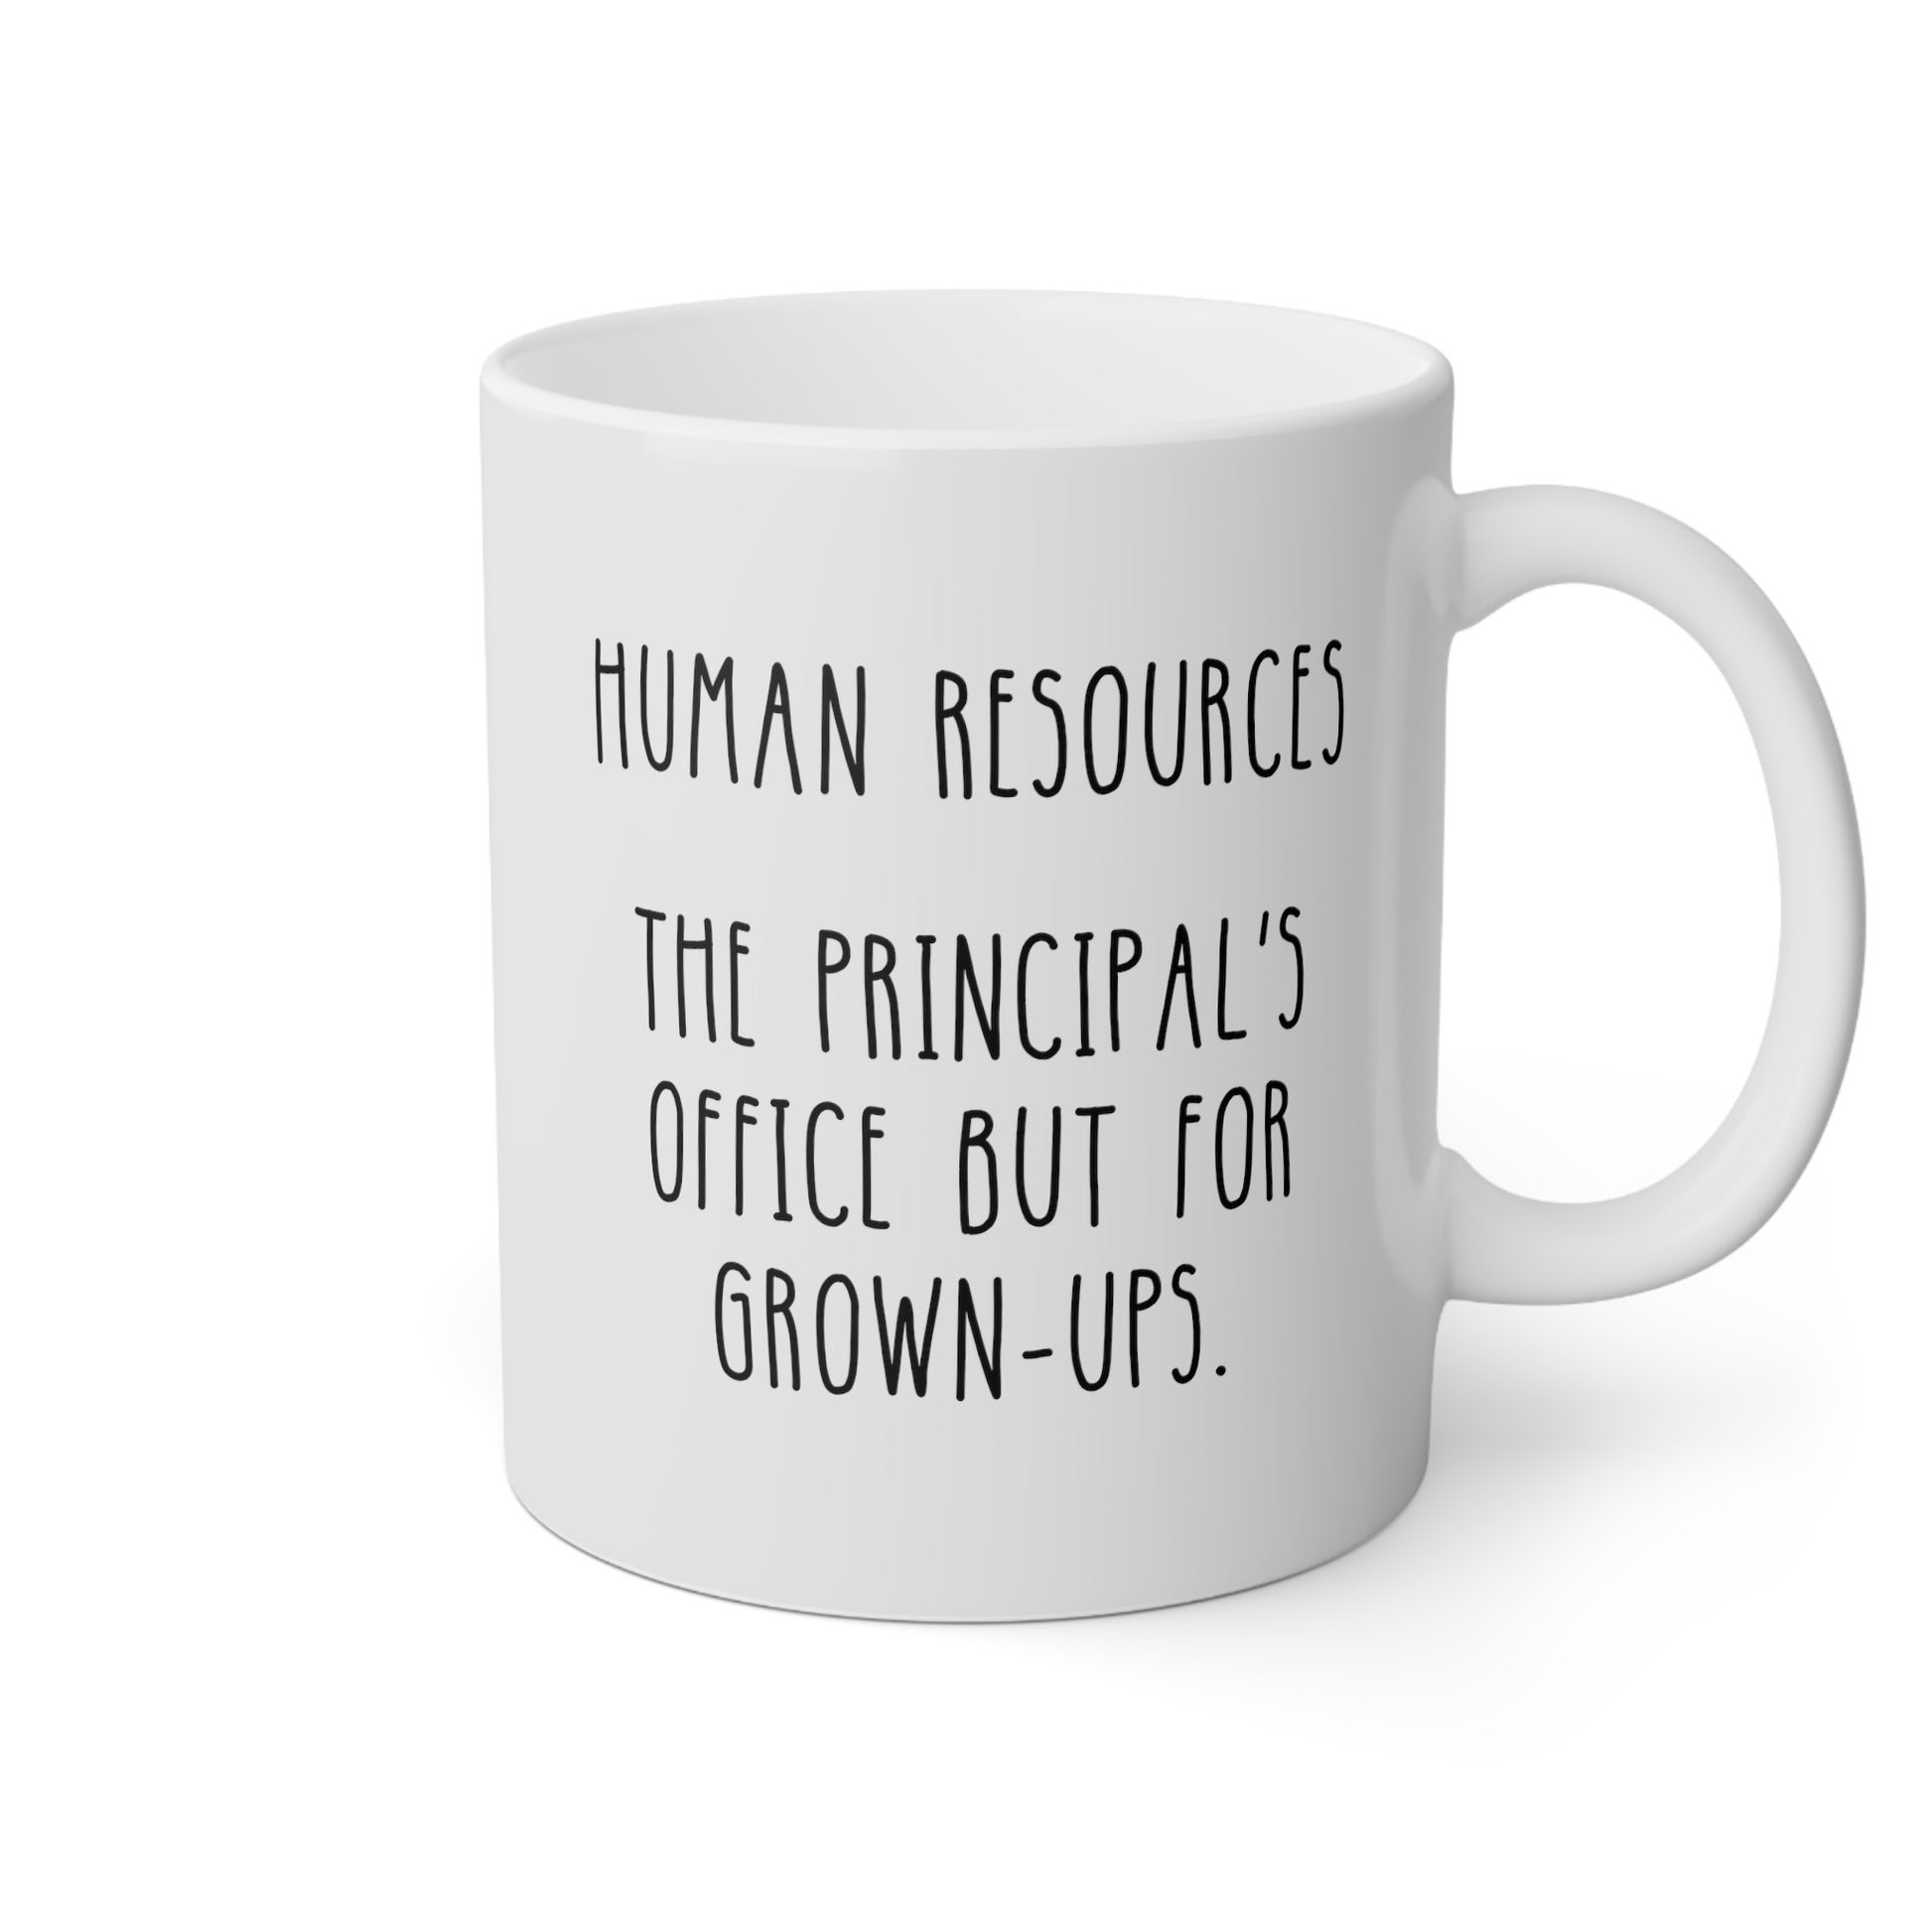 Human Resources The Prinicipal's Office But For Grown-ups 11oz white funny large coffee mug gift for HR specialist manager waveywares wavey wares wavywares wavy wares